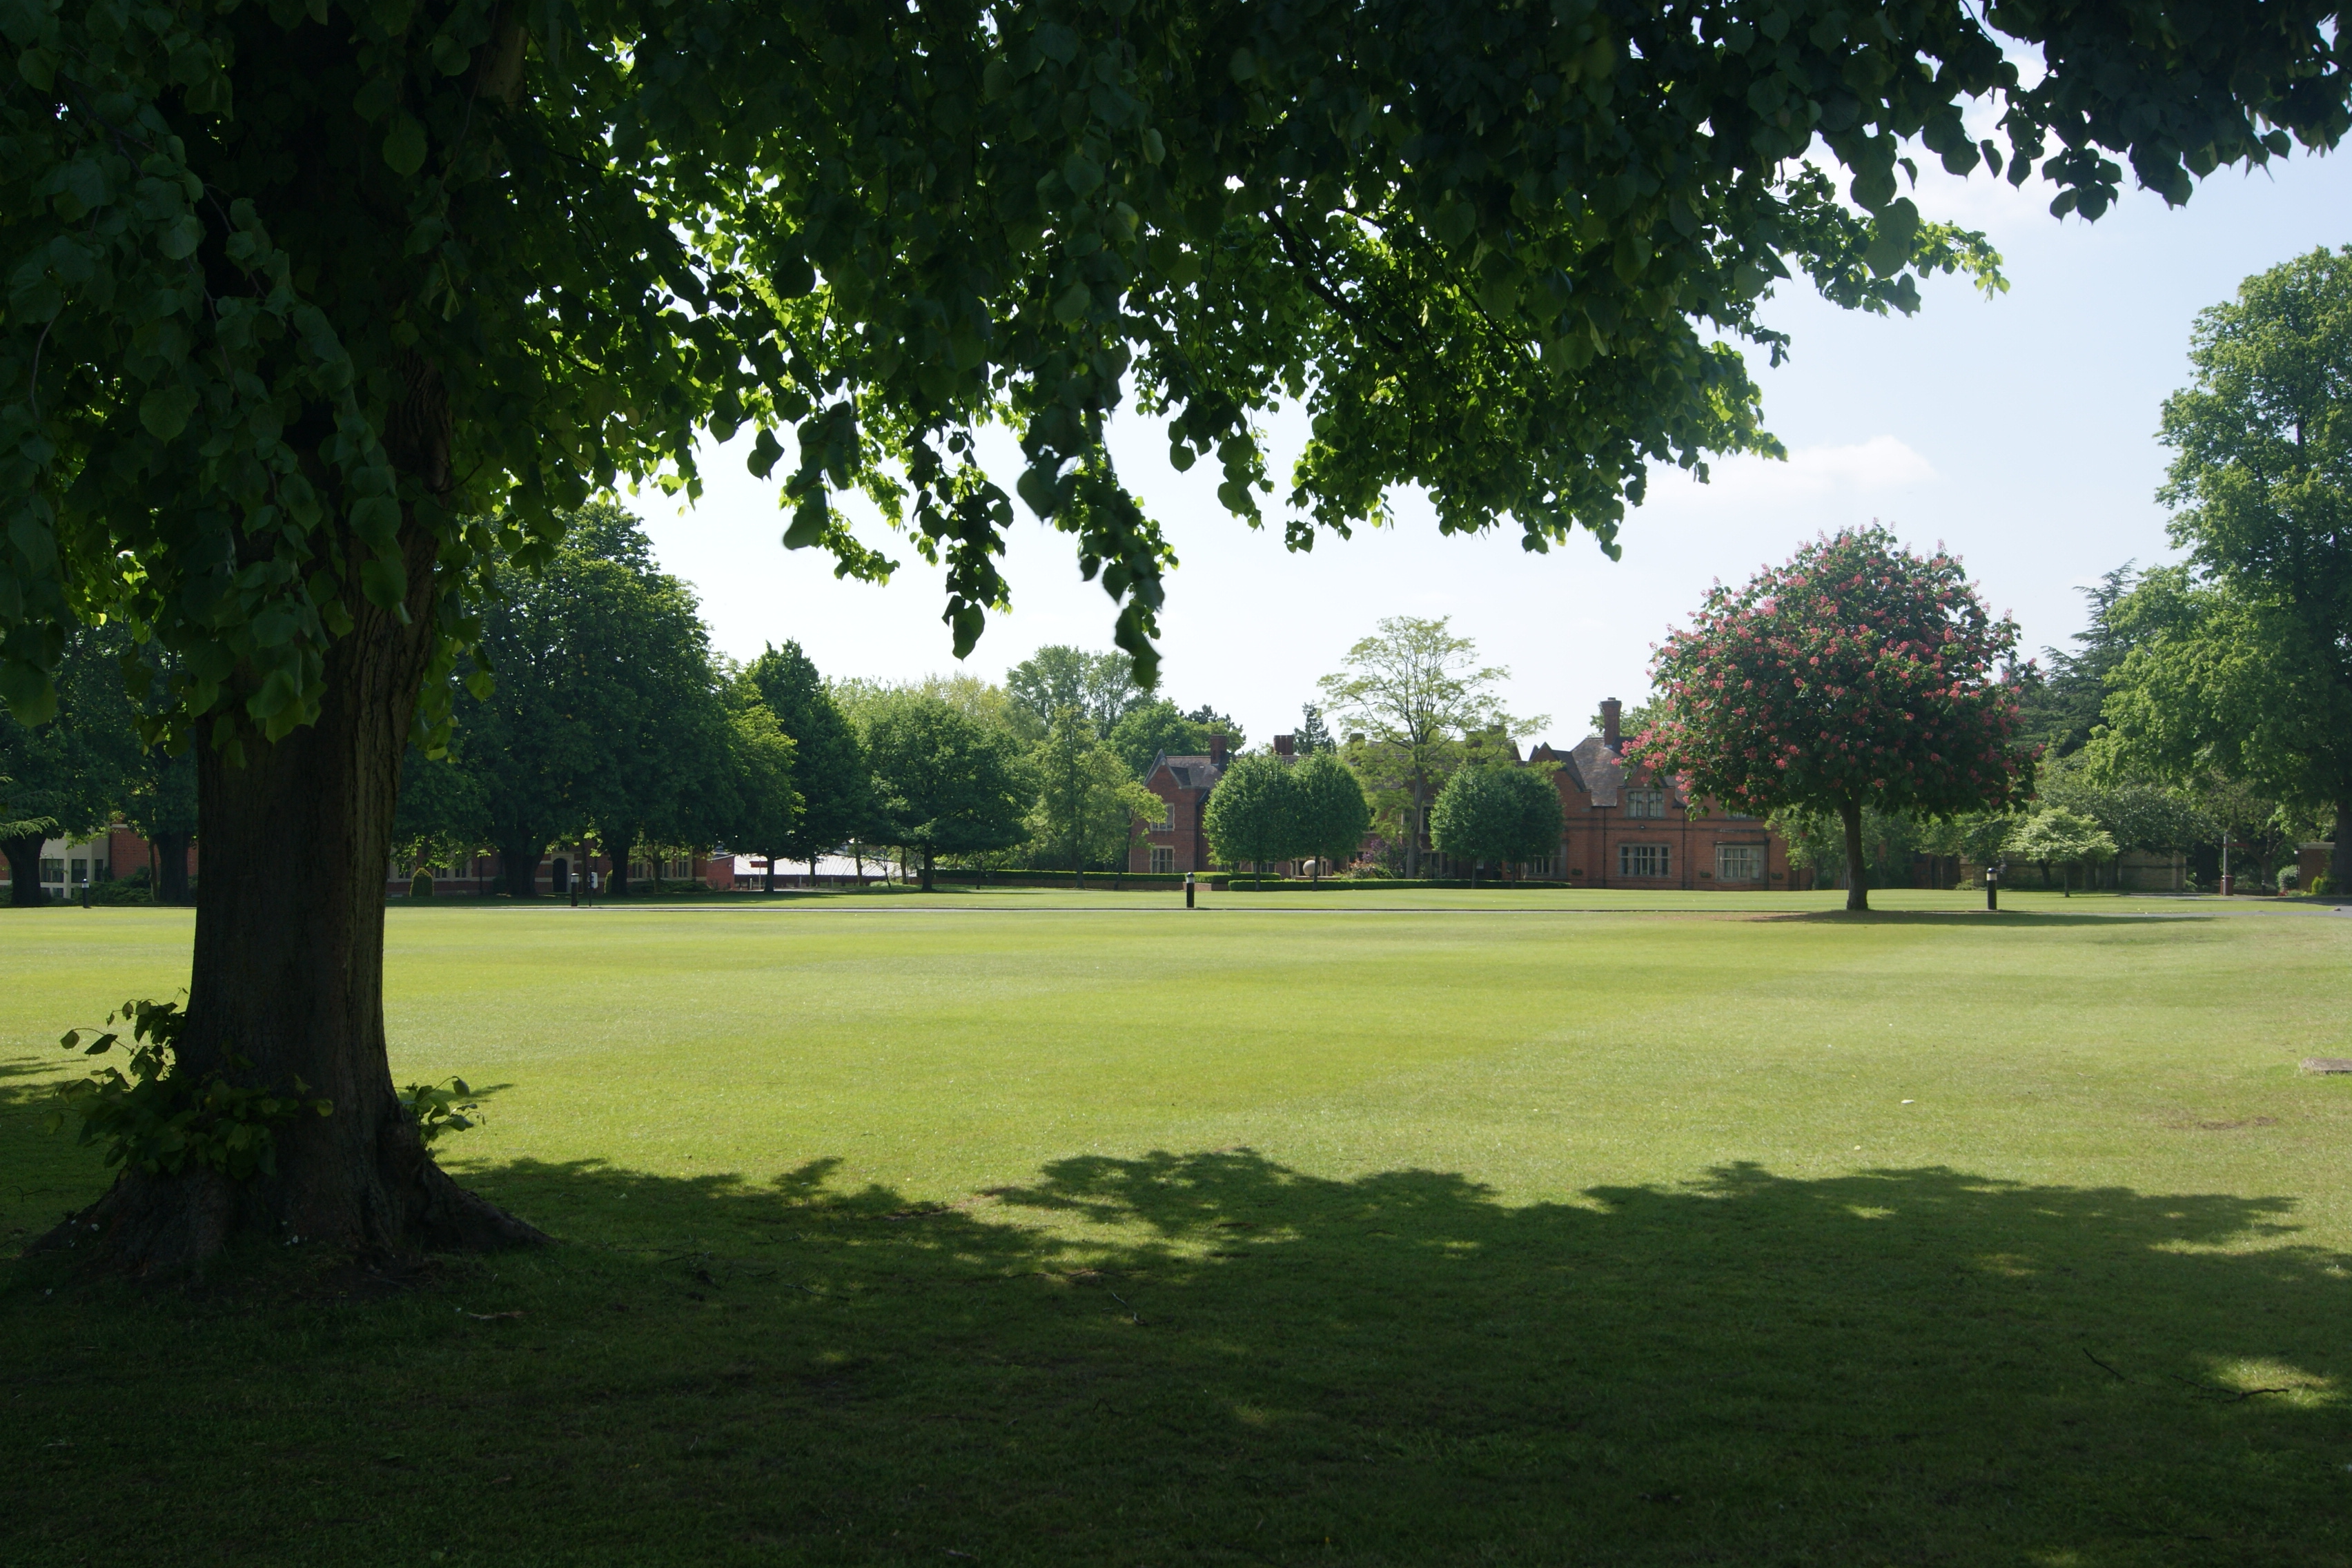 The view across Gordon Green towards the Administration building